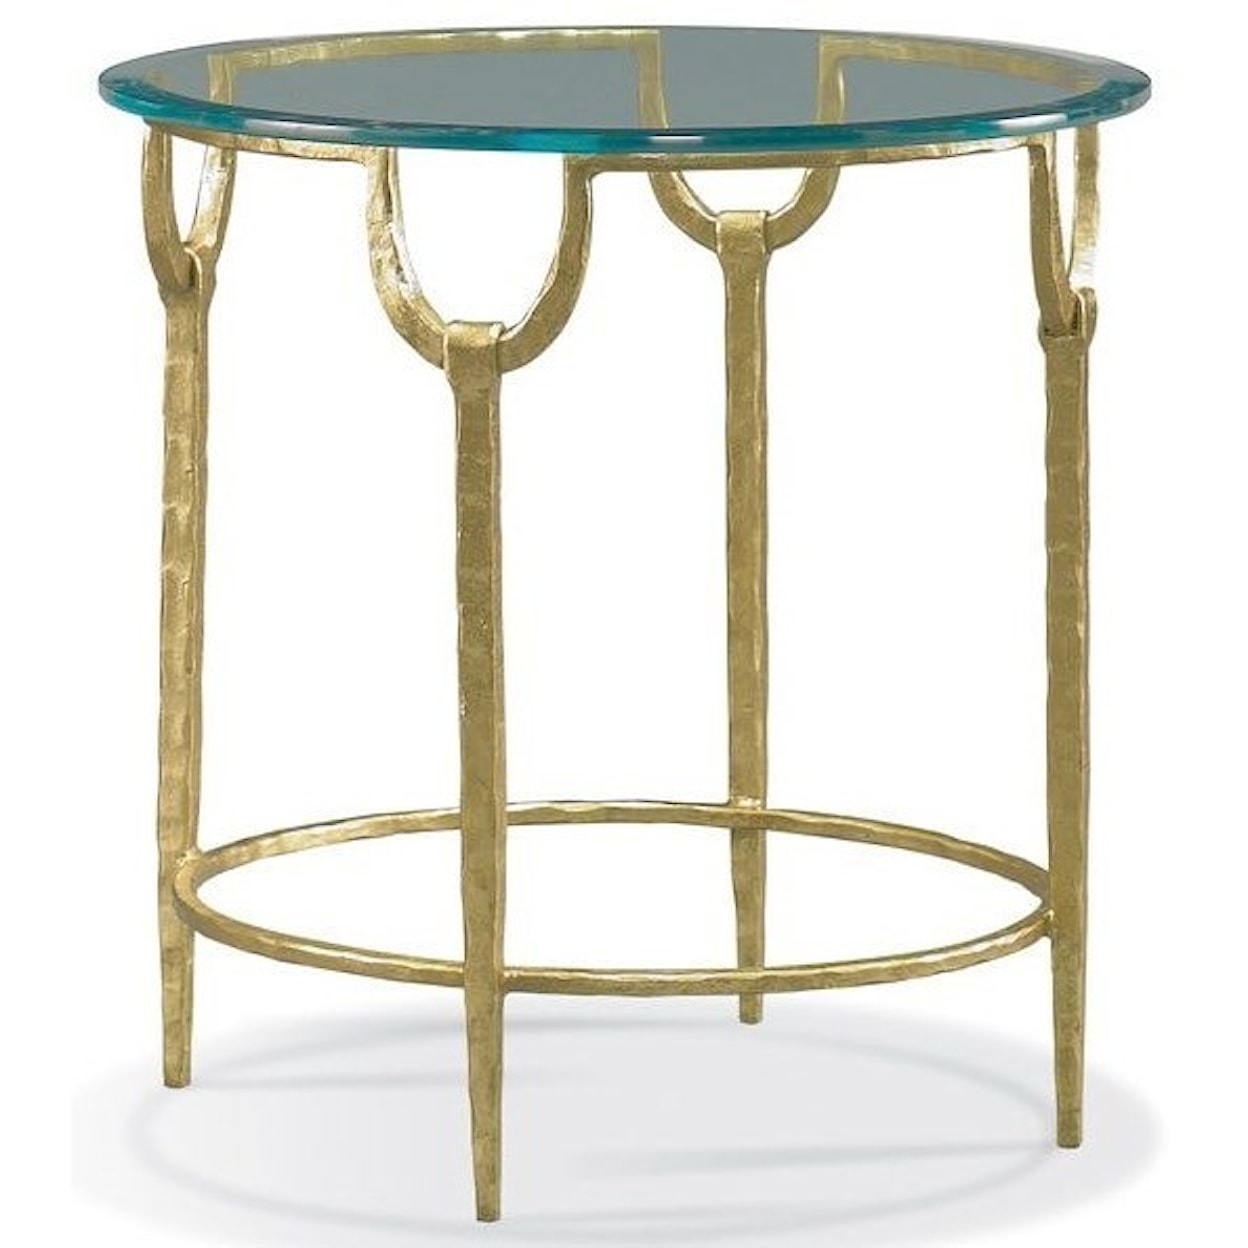 CTH Sherrill Occasional Masterpiece - Trifecta Round Lamp Table